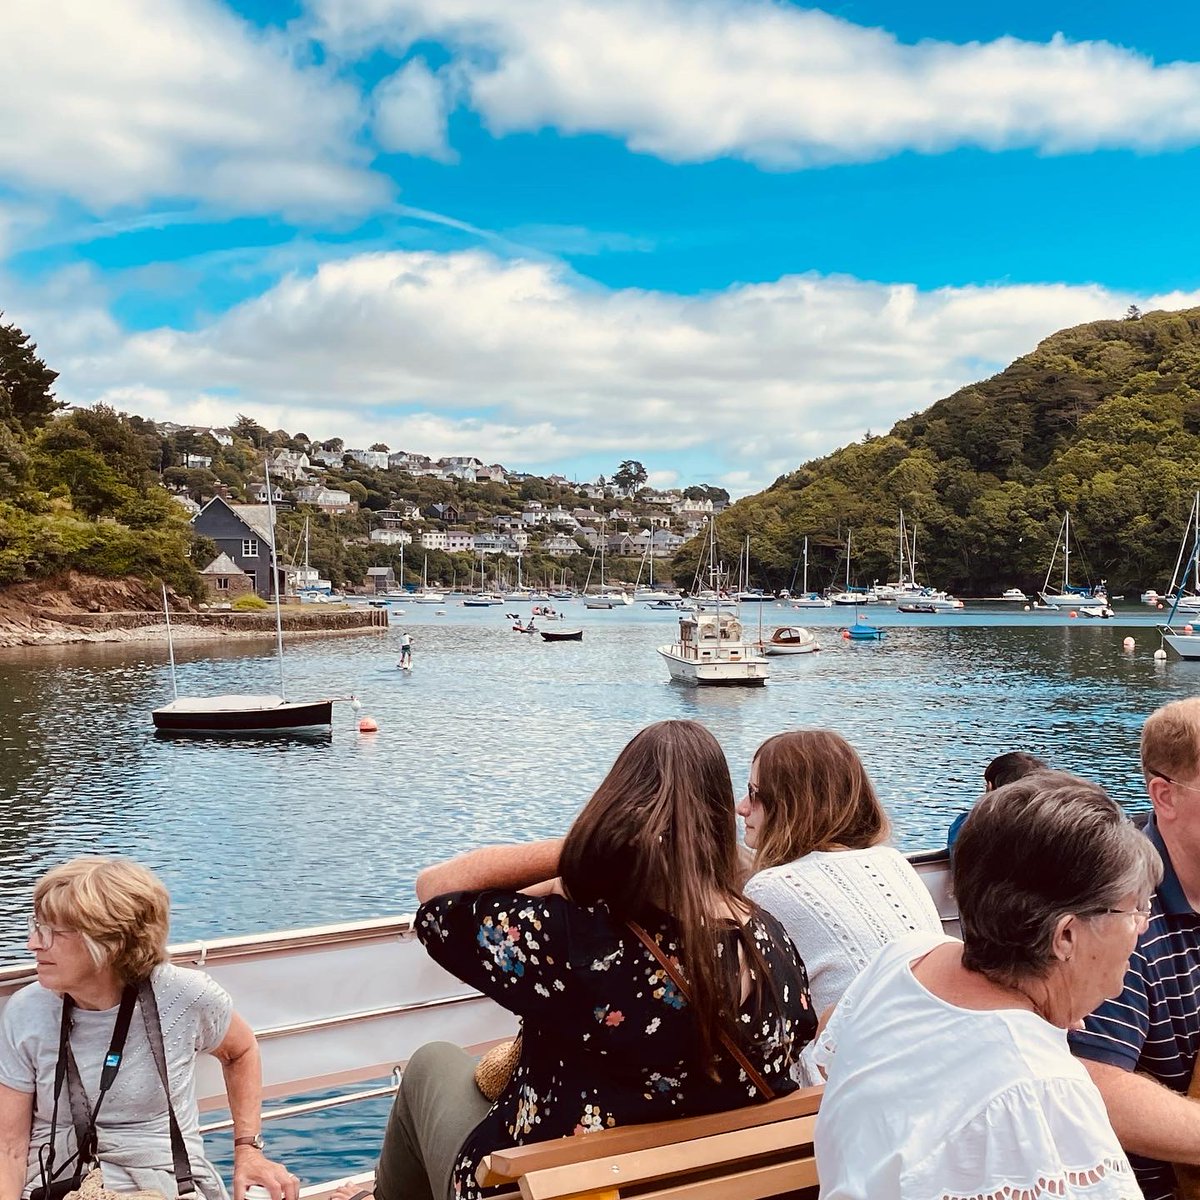 Set sail with us to the River Yealm this Saturday!🚤 Departing at 14:45, we'll cruise through picturesque scenery and soak up the beauty of nature. Don't miss out on this unforgettable experience - join us for a trip filled with relaxation and adventure! plymouthboattrips.co.uk